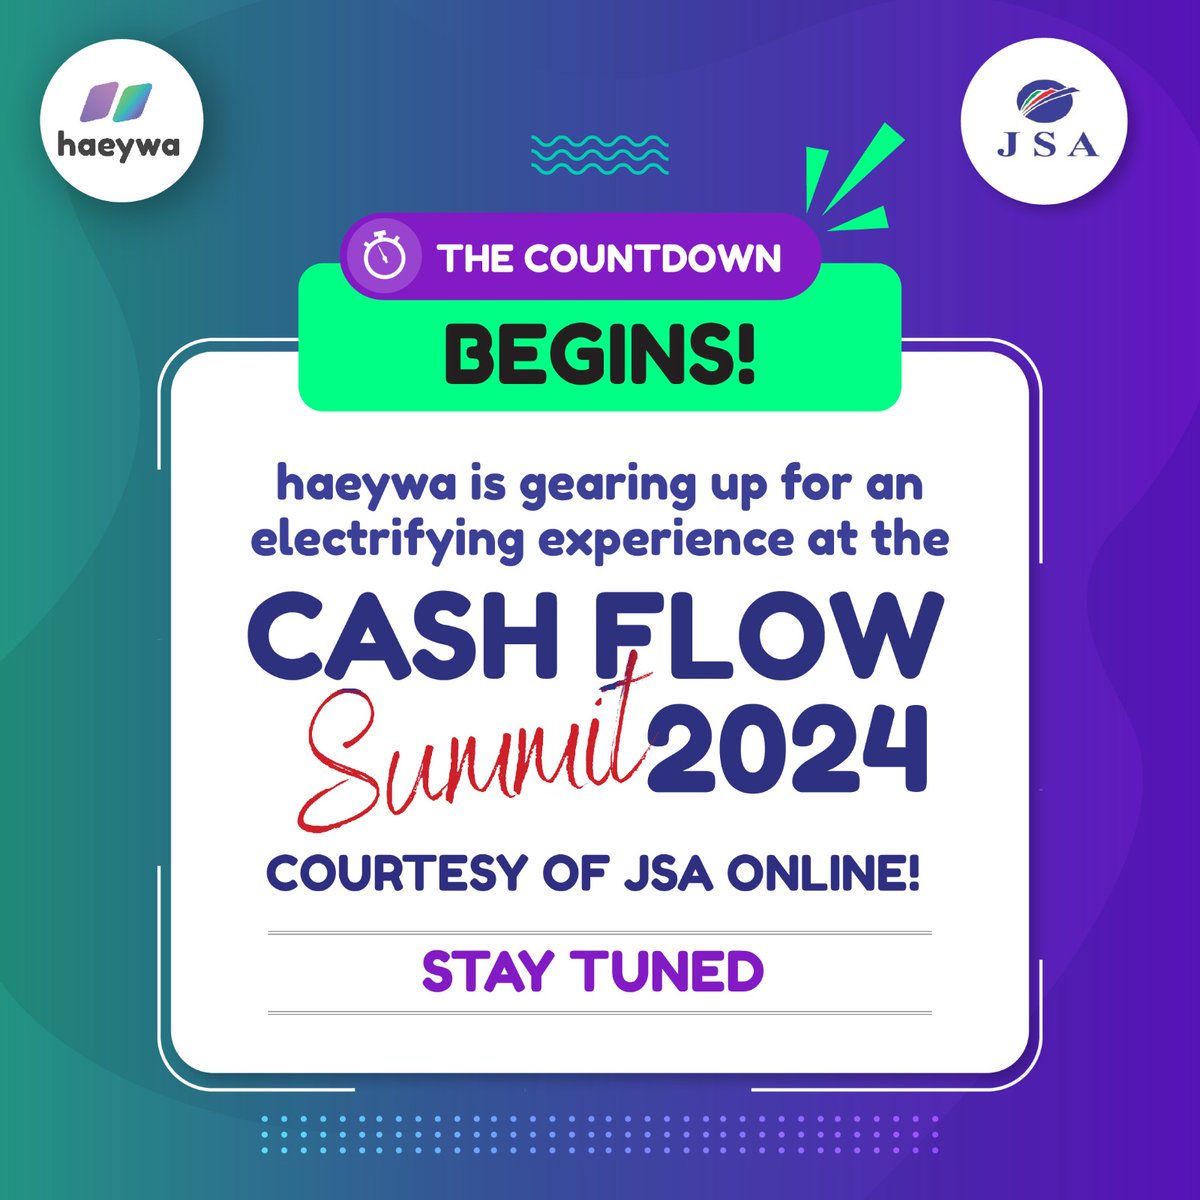 haeywa is gearing up for an electrifying experience at the Cash Flow Summit 2024, courtesy of JSA Online! 

Stay tuned as we embark on this exhilarating adventure and share the highlights with you every step of the way!

To Register: bit.ly/Shilpa-CashFlo… 

#CashFlowSummit2024